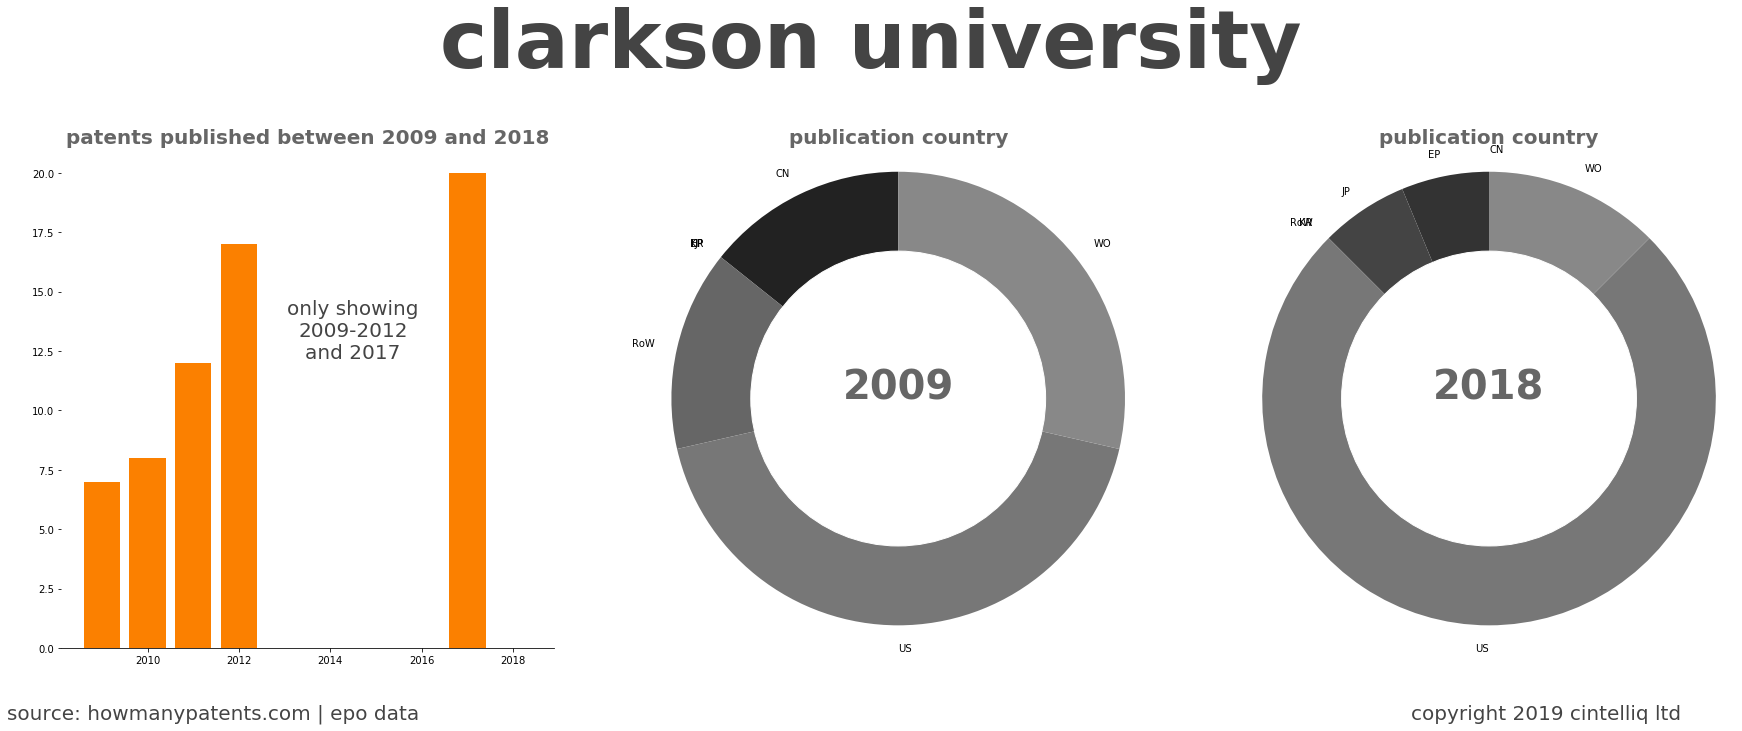 summary of patents for Clarkson University